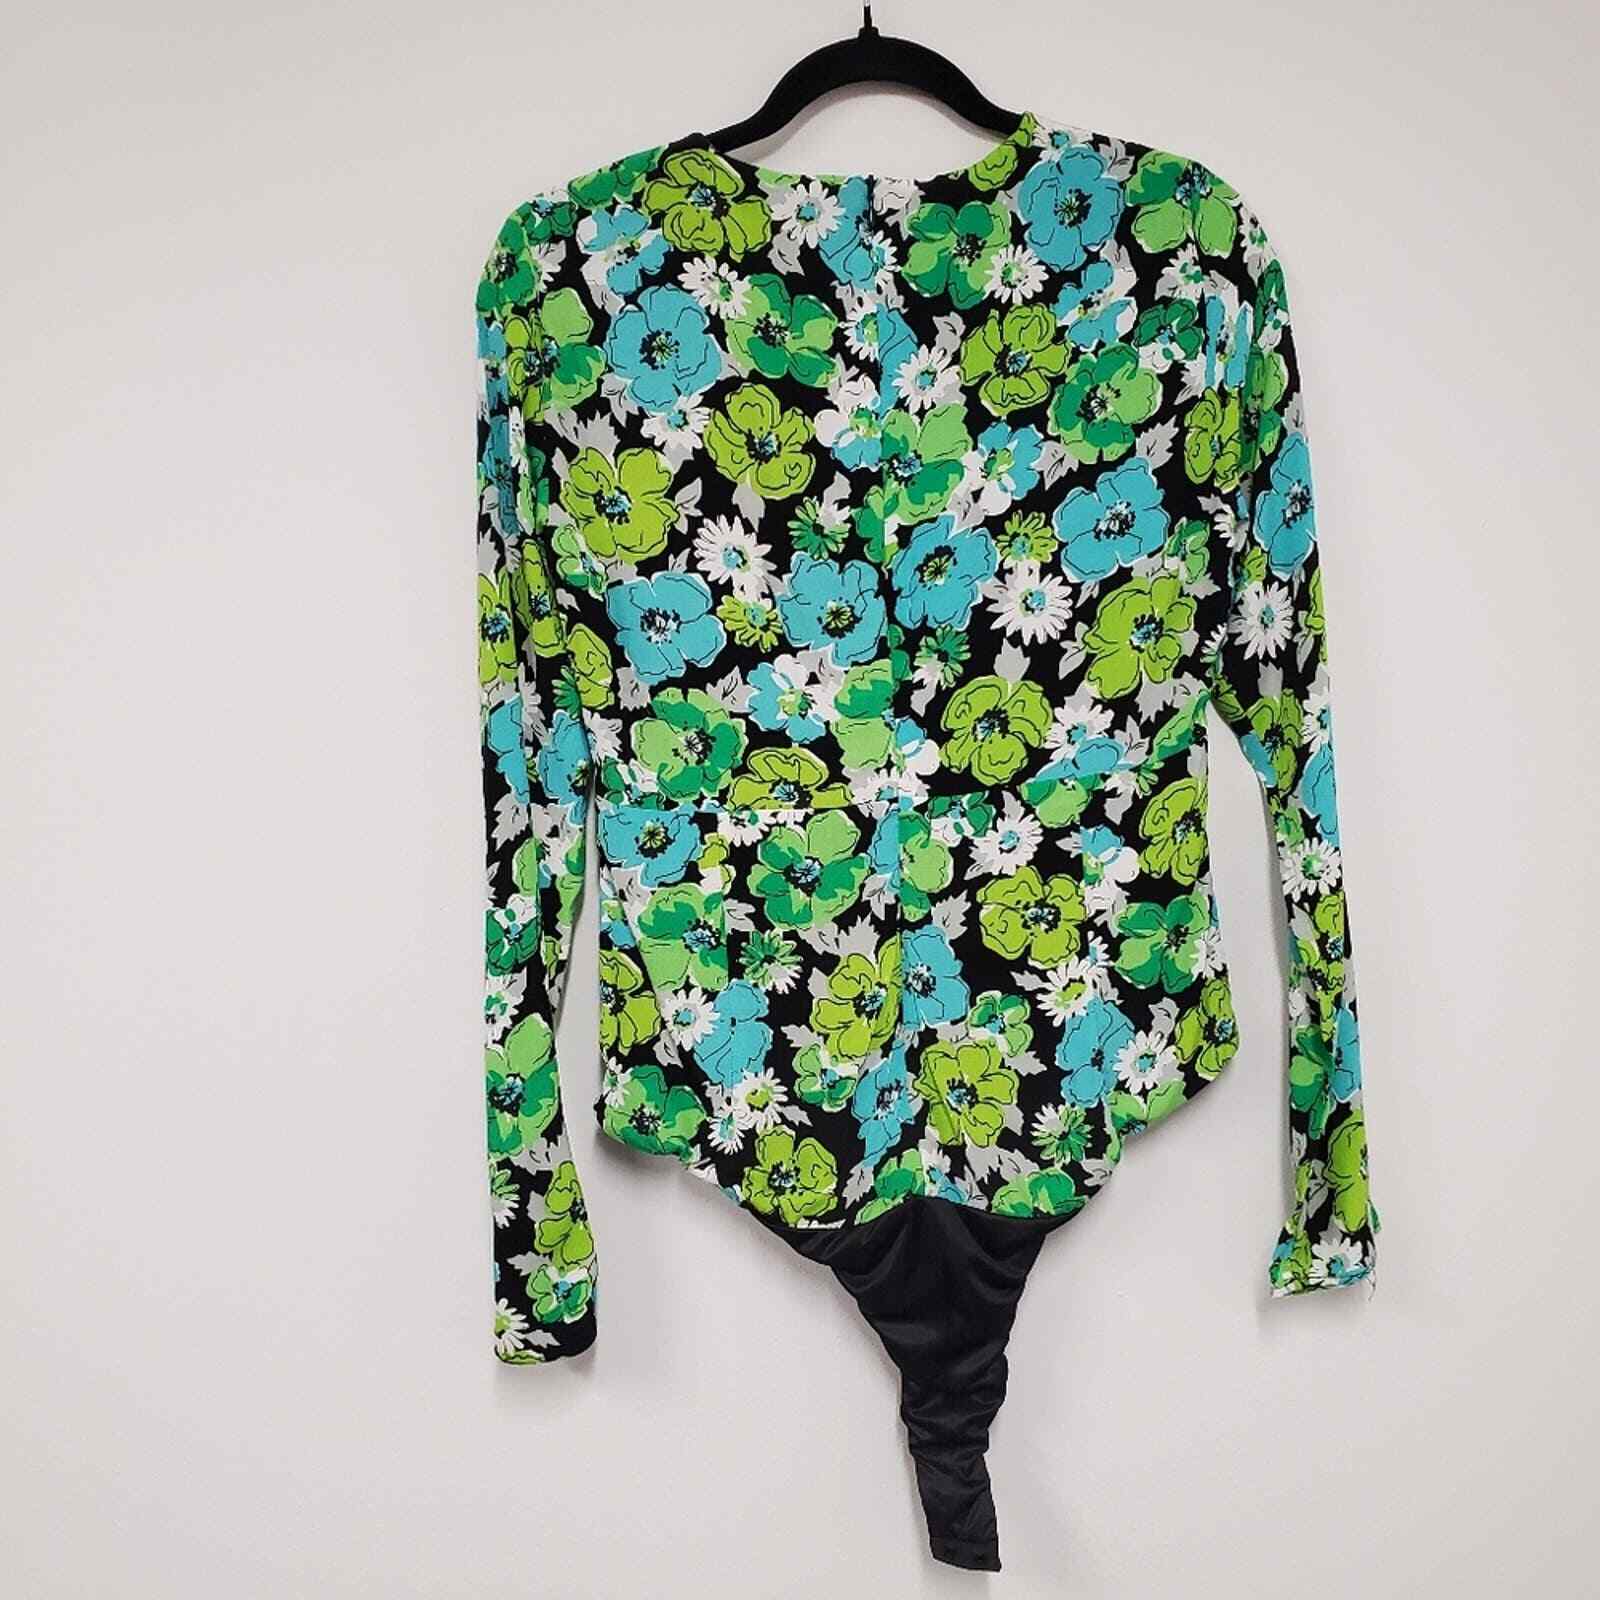 NEW Zara Drapey Floral Bodysuit M Bright Green Blue 70's Business Casual Sexy